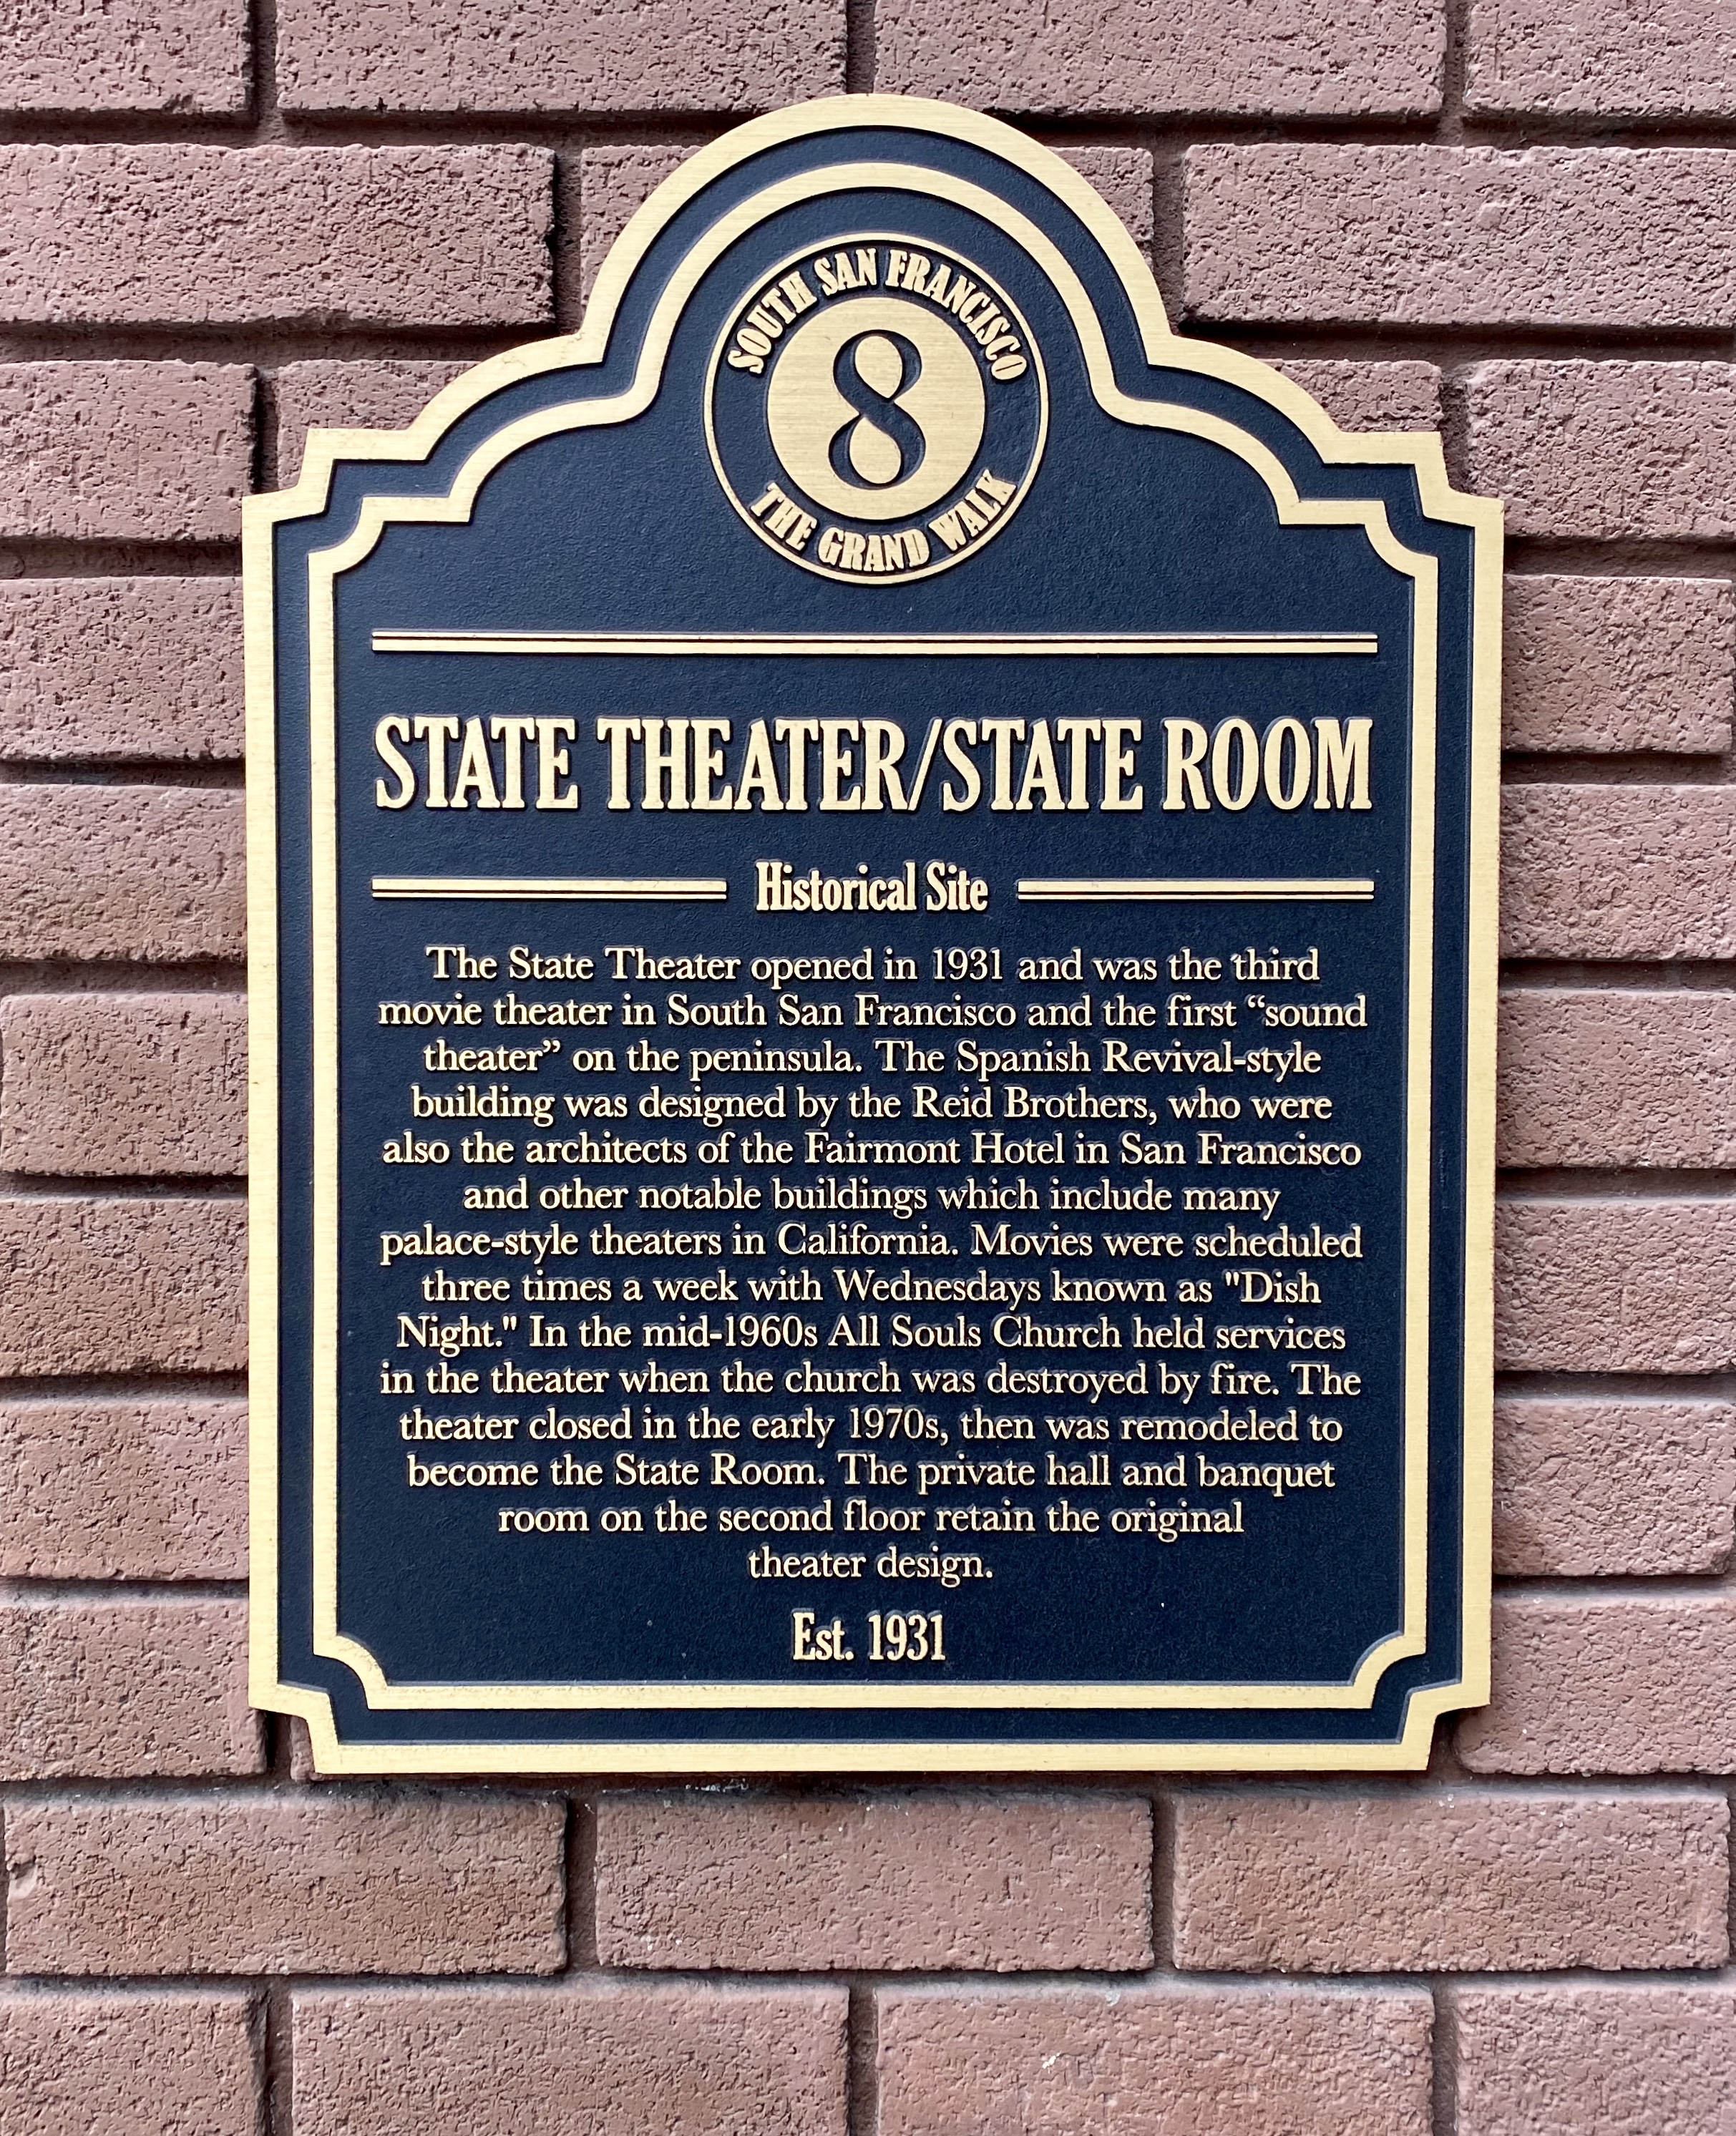 State Theater/State Room Marker